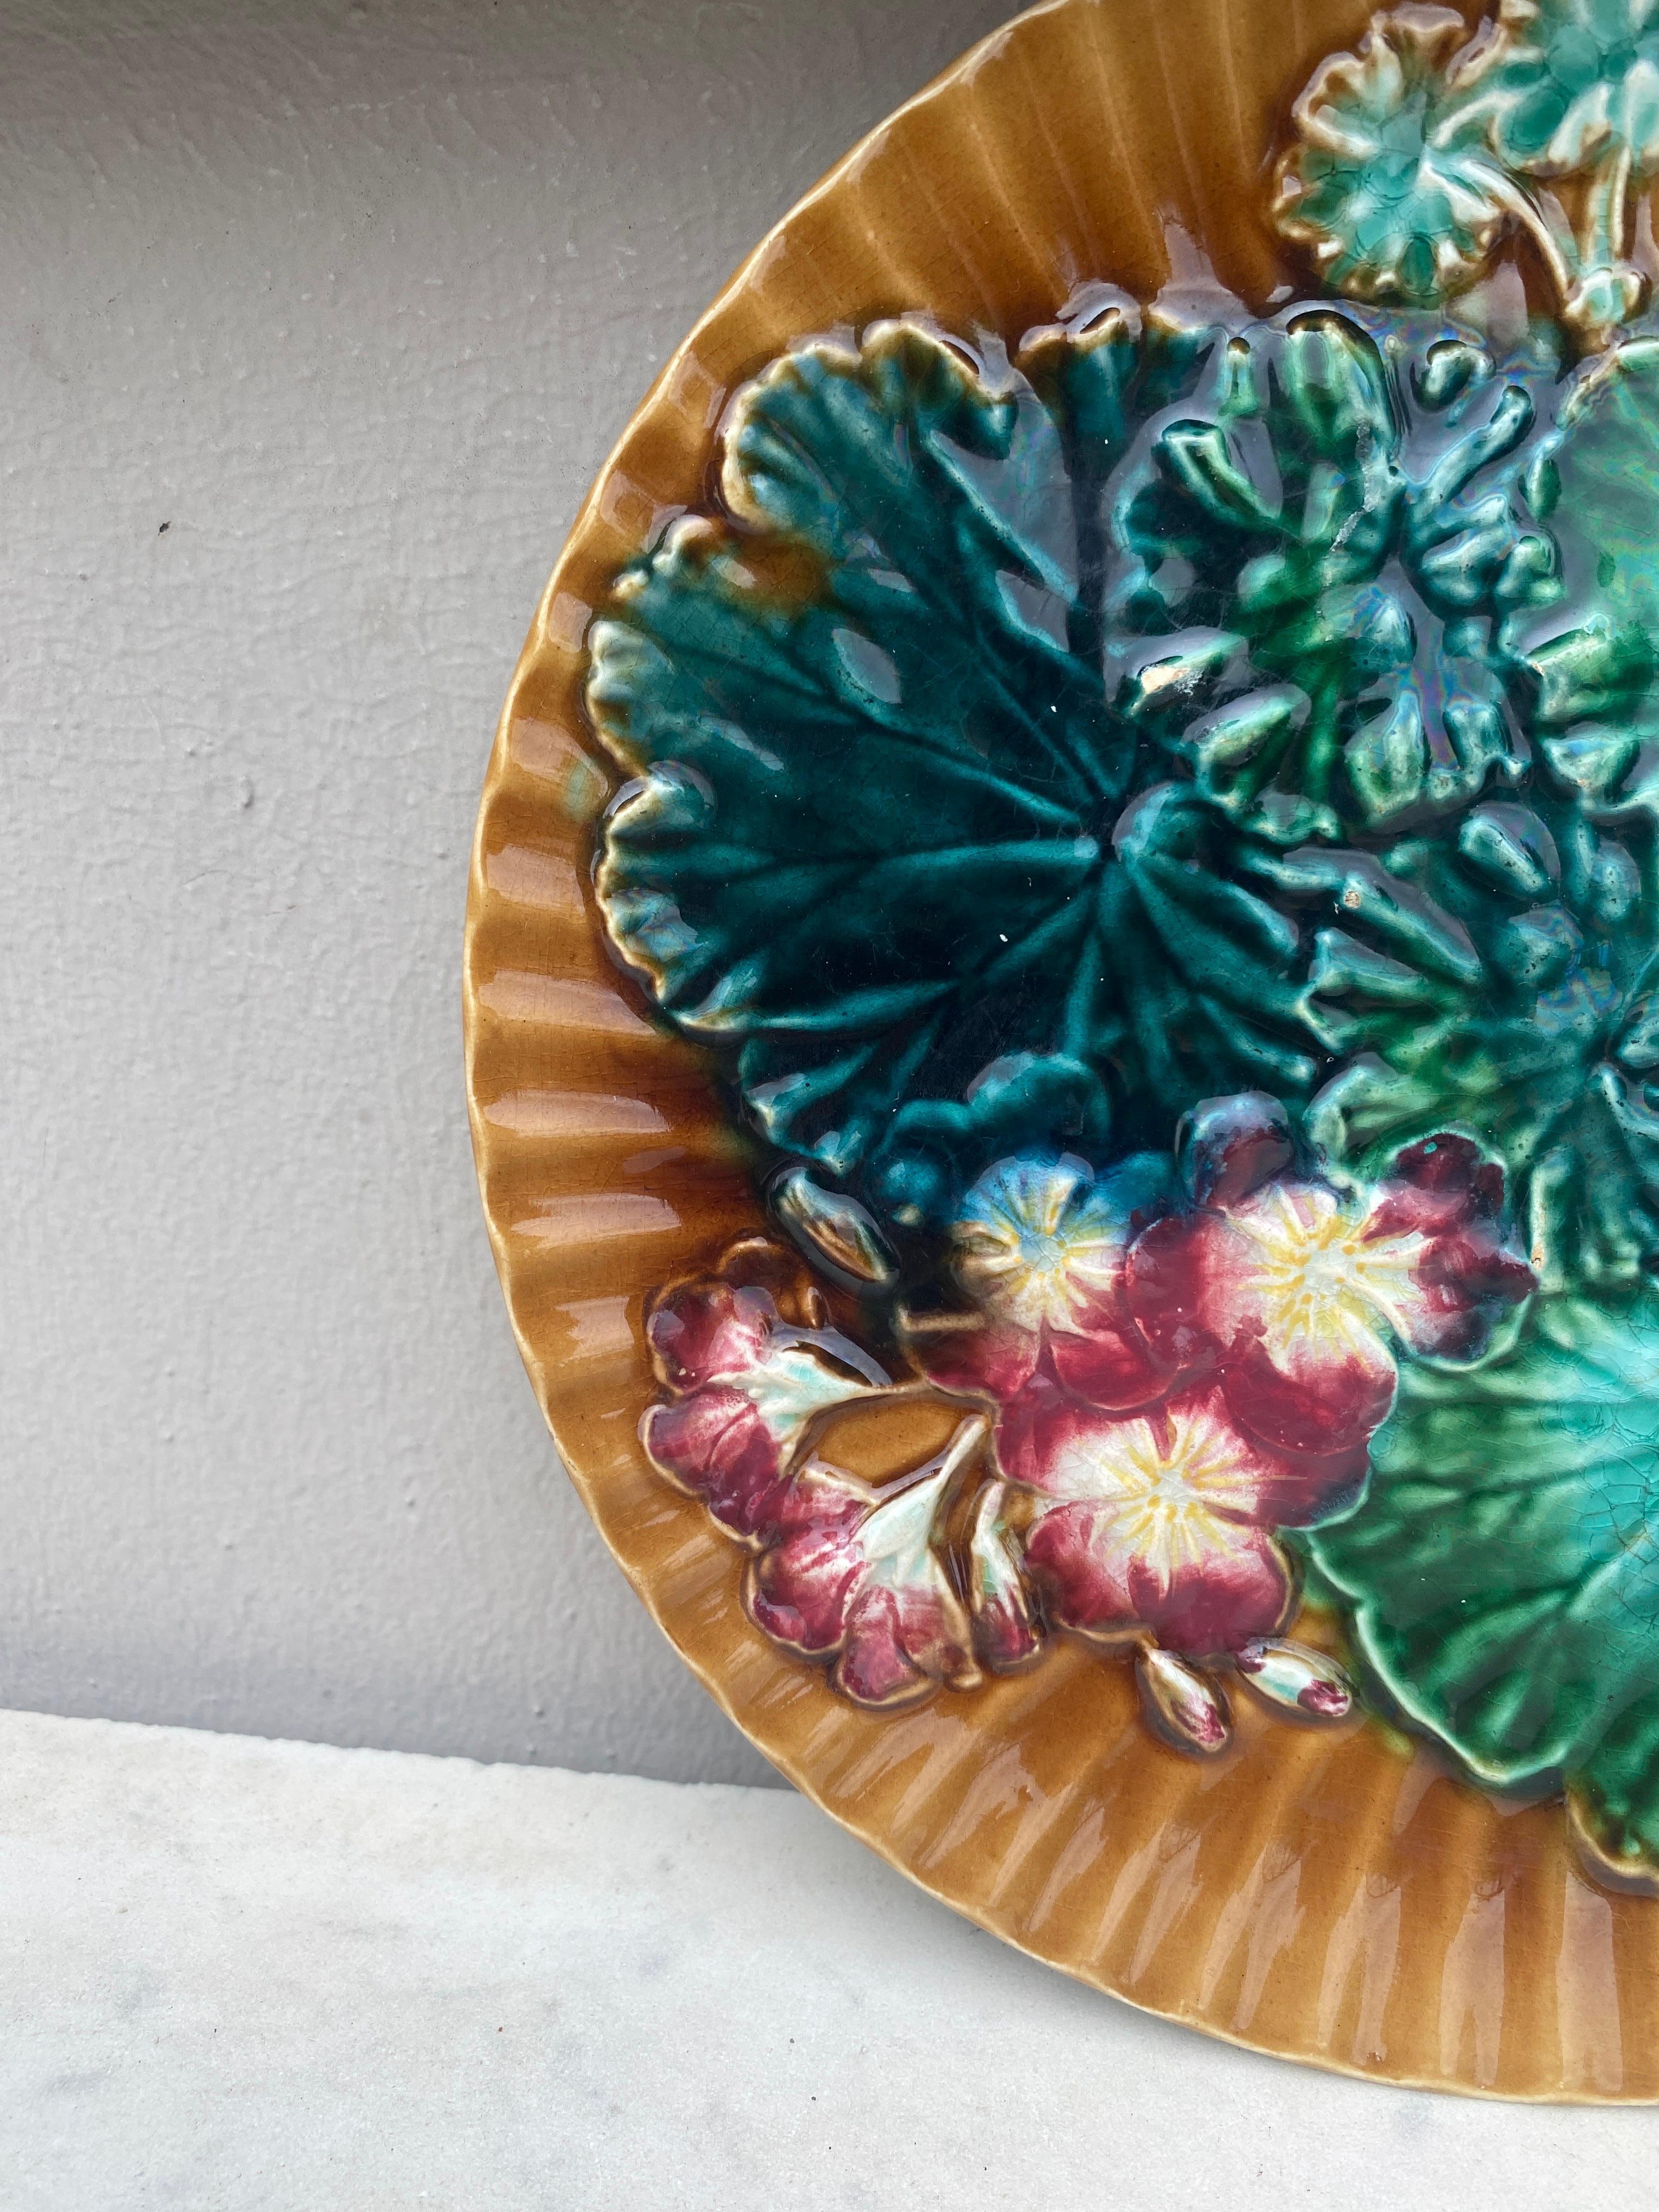 Majolica leaves & flowers plate Clairefontaine, circa 1890.